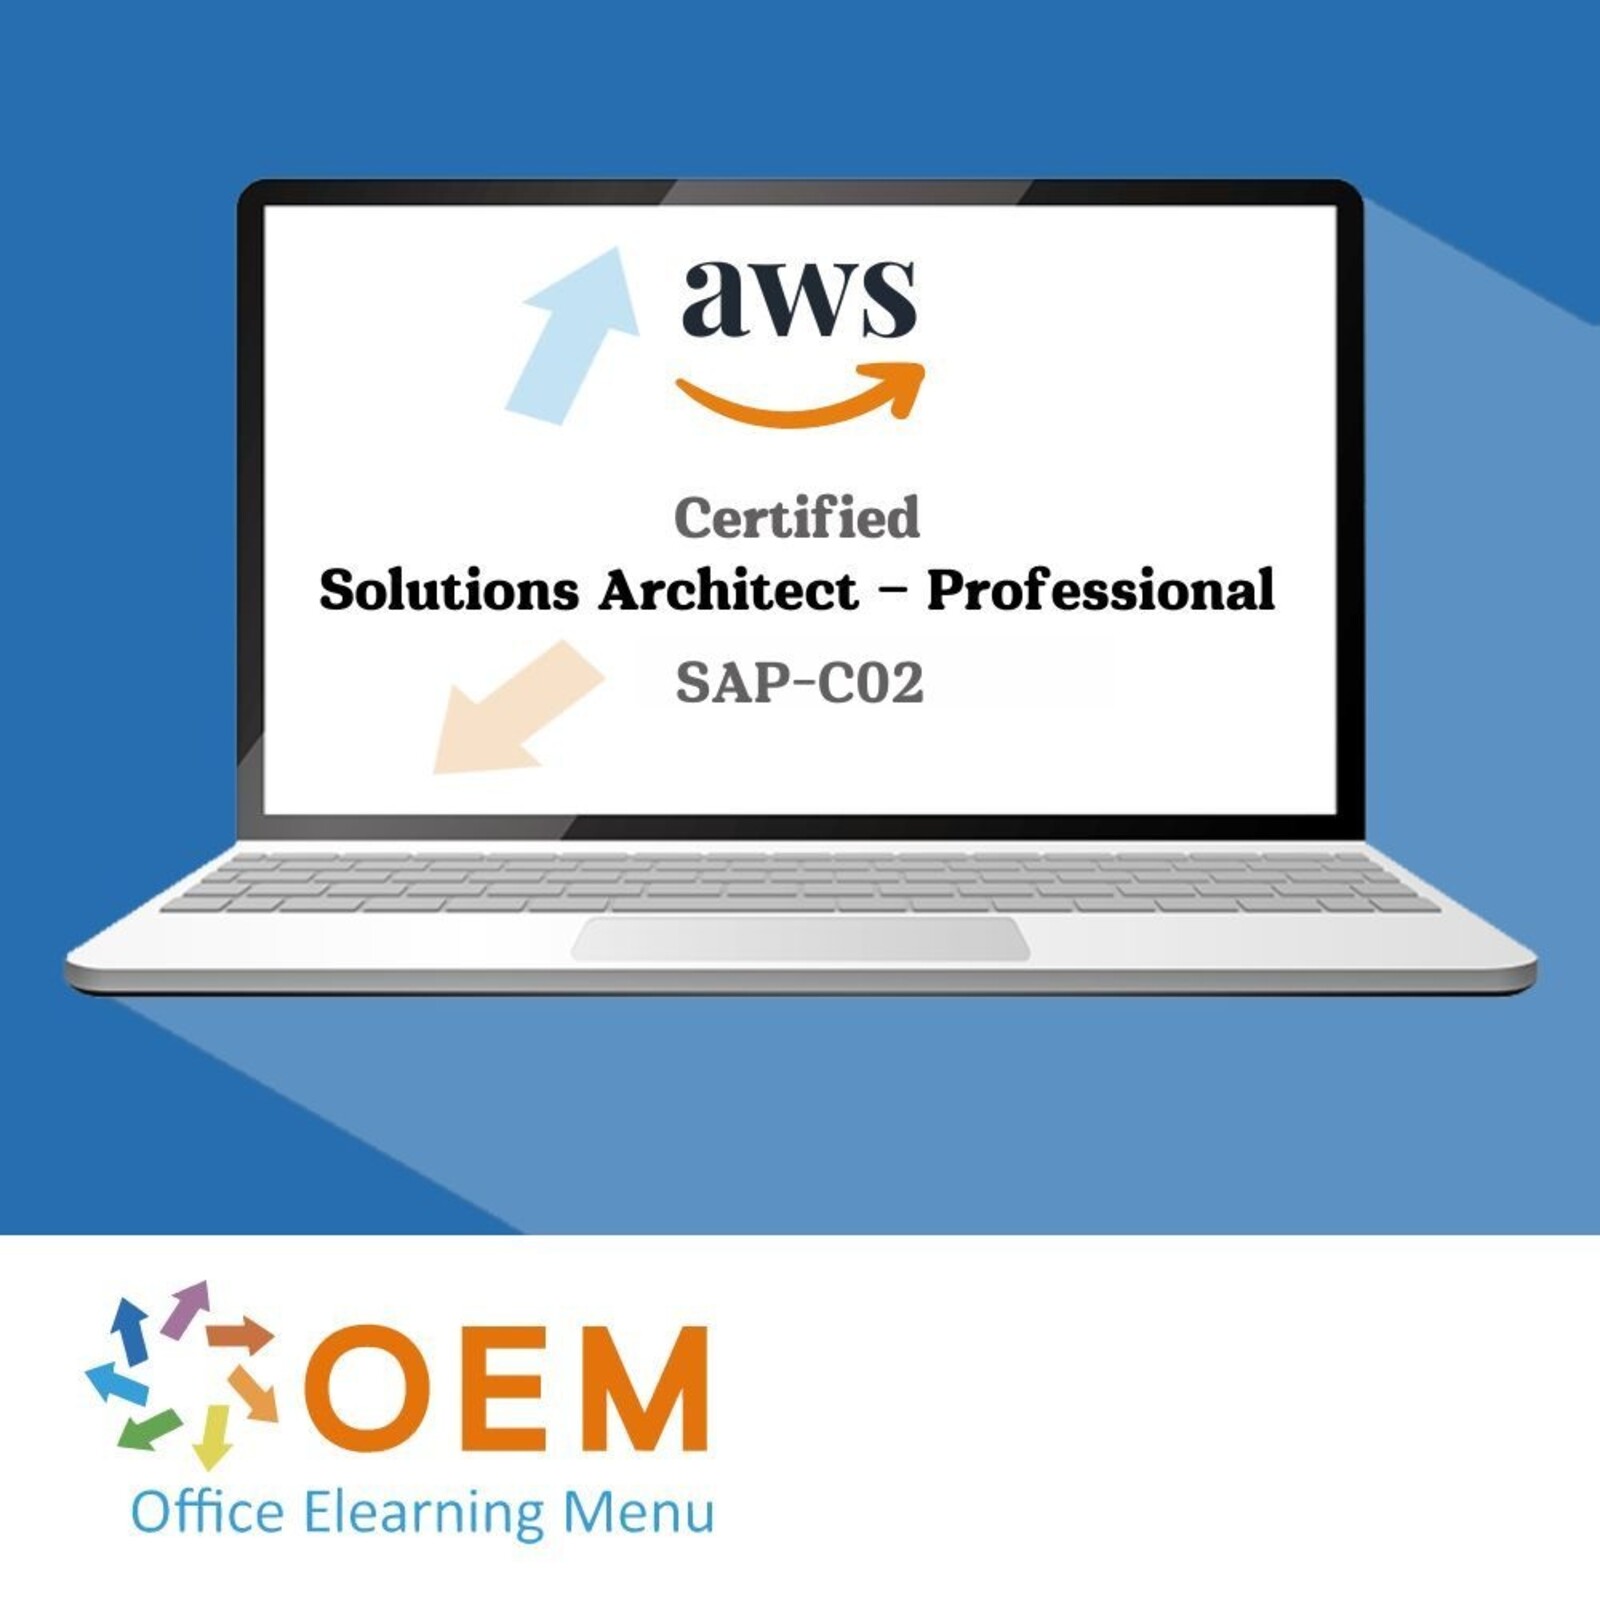 Amazon Web Services AWS Certified Solutions Architect – Professional SAP-C02 Training